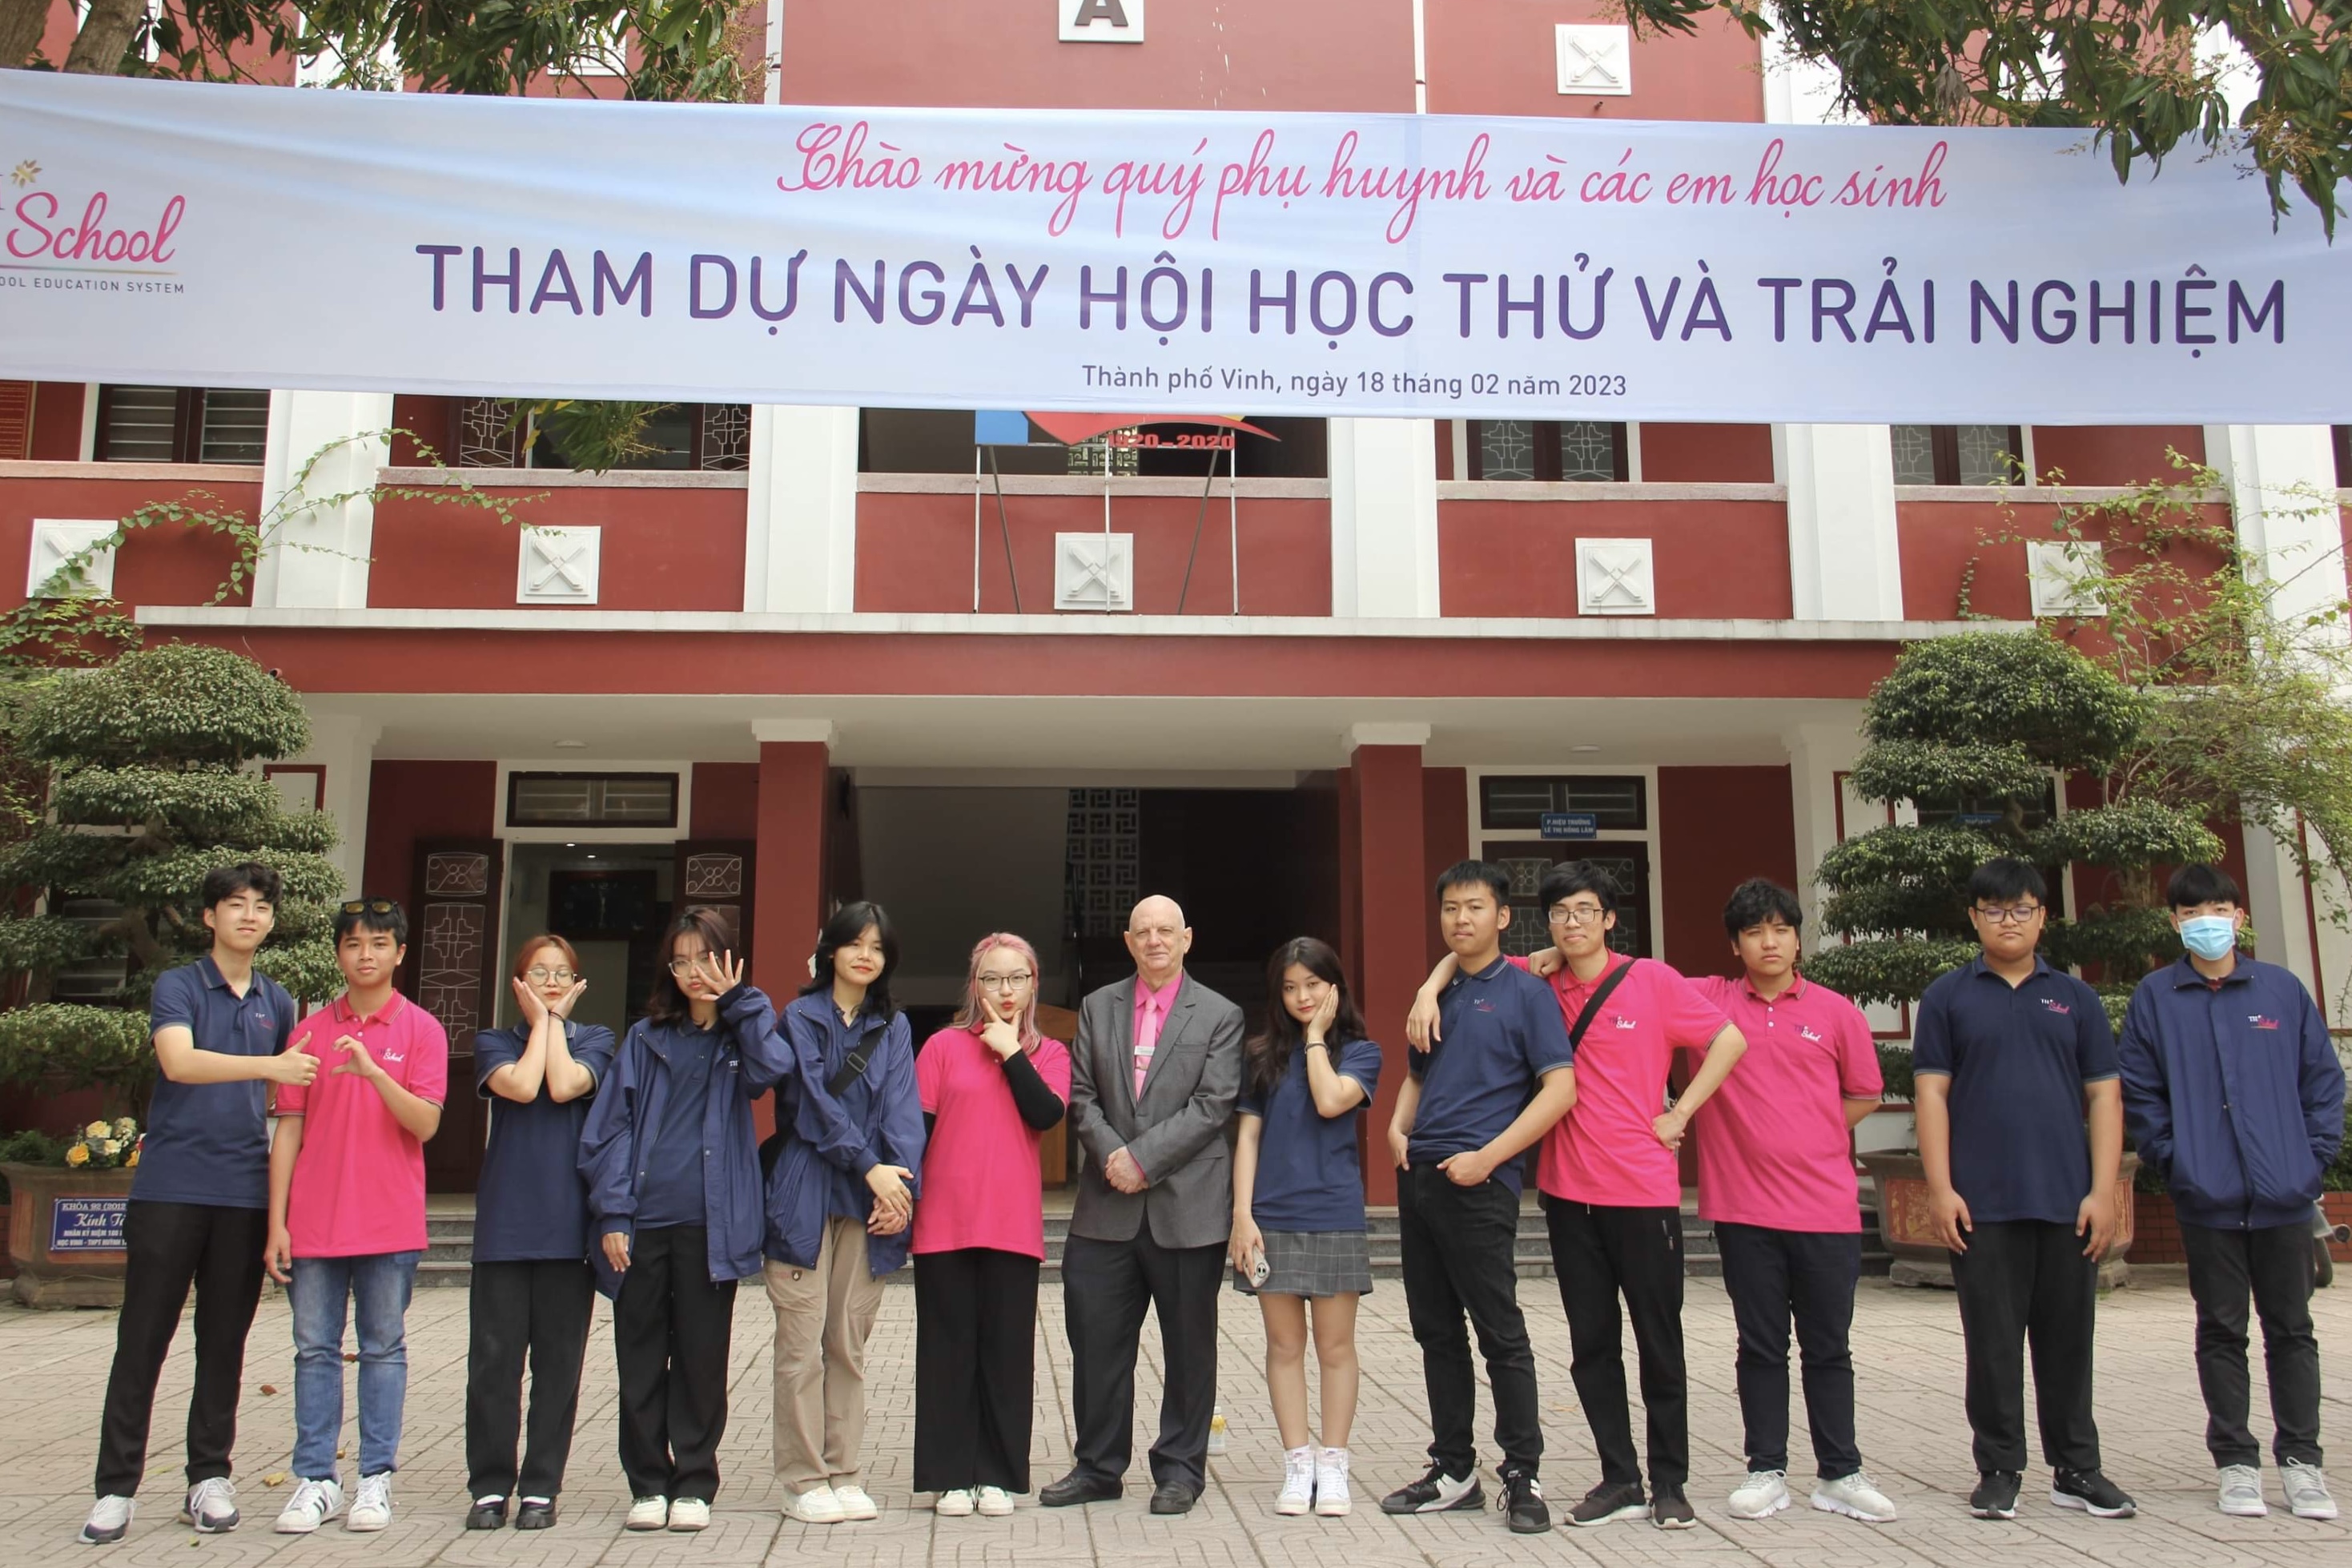 Come to Vinh city to try the international program